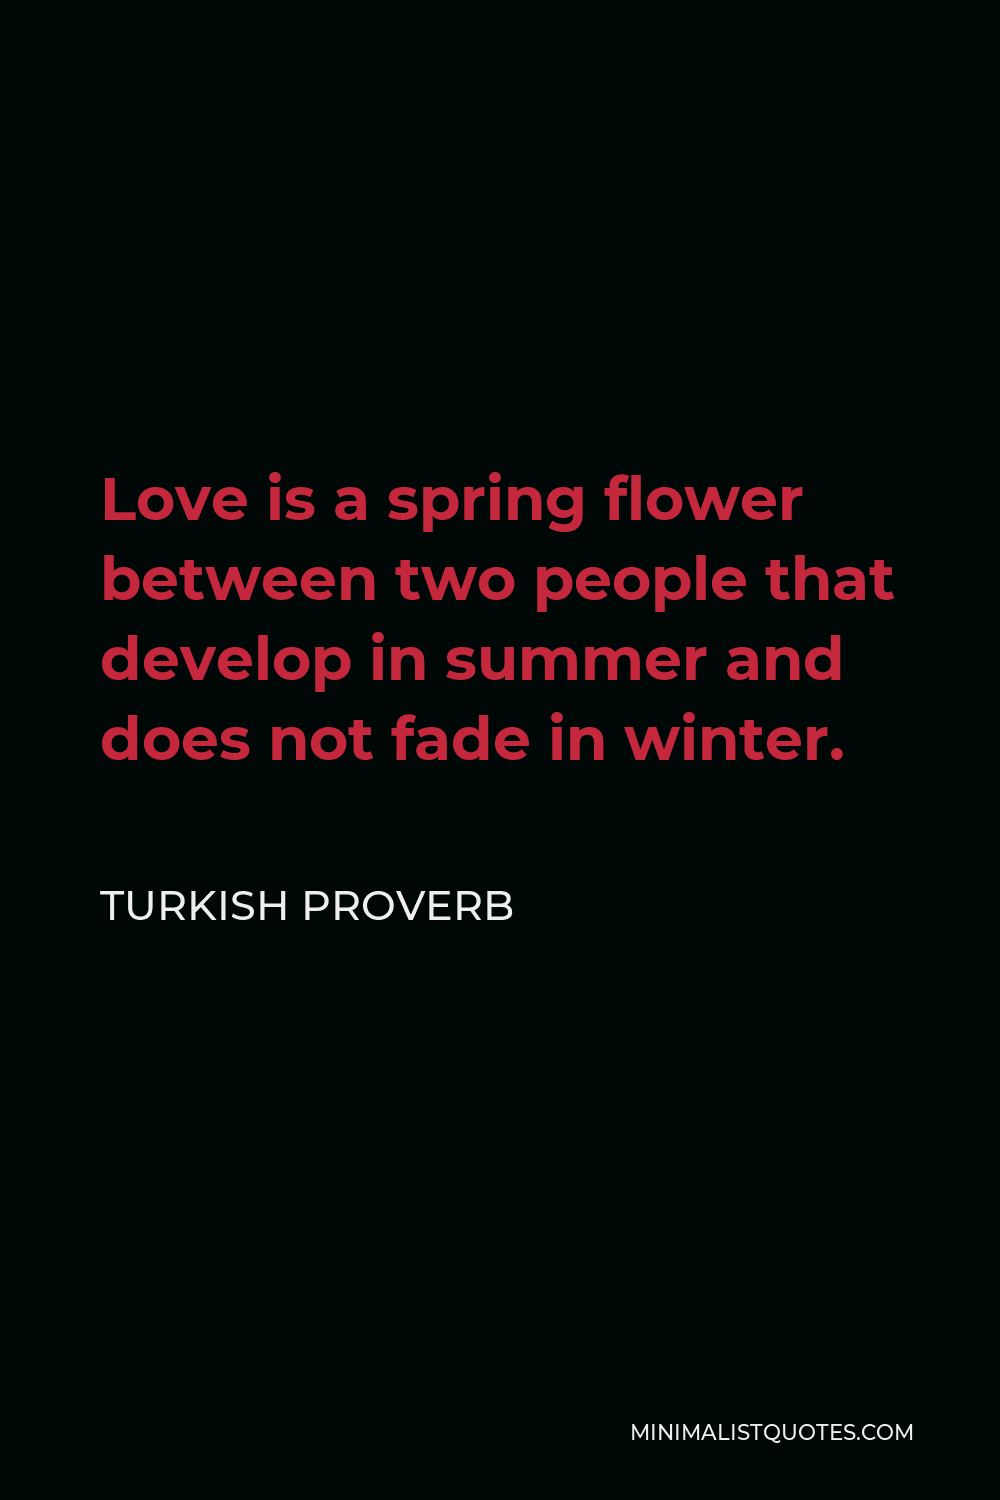 Turkish Proverb Quote - Love is a spring flower between two people that develop in summer and does not fade in winter.